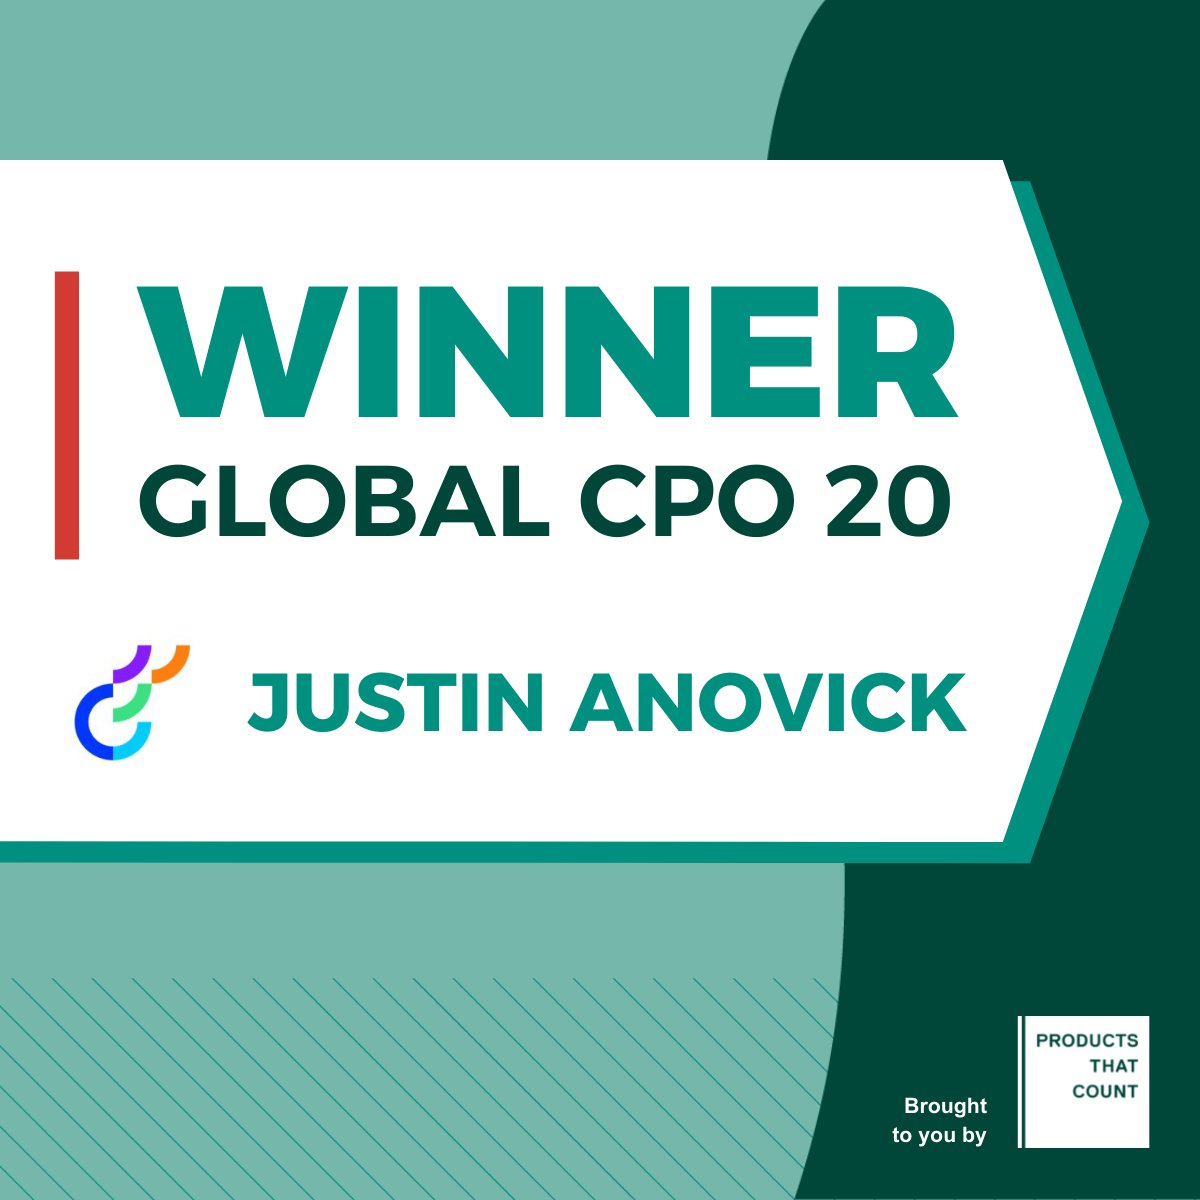 We are excited to share that Optimizely's own @jranovick was recognized as a top 20 global CPO, hosted by @ProductsCount @Capgemini and @MightyCapital. Congrats, Justin! #globalCPO20 #CPO #productleader